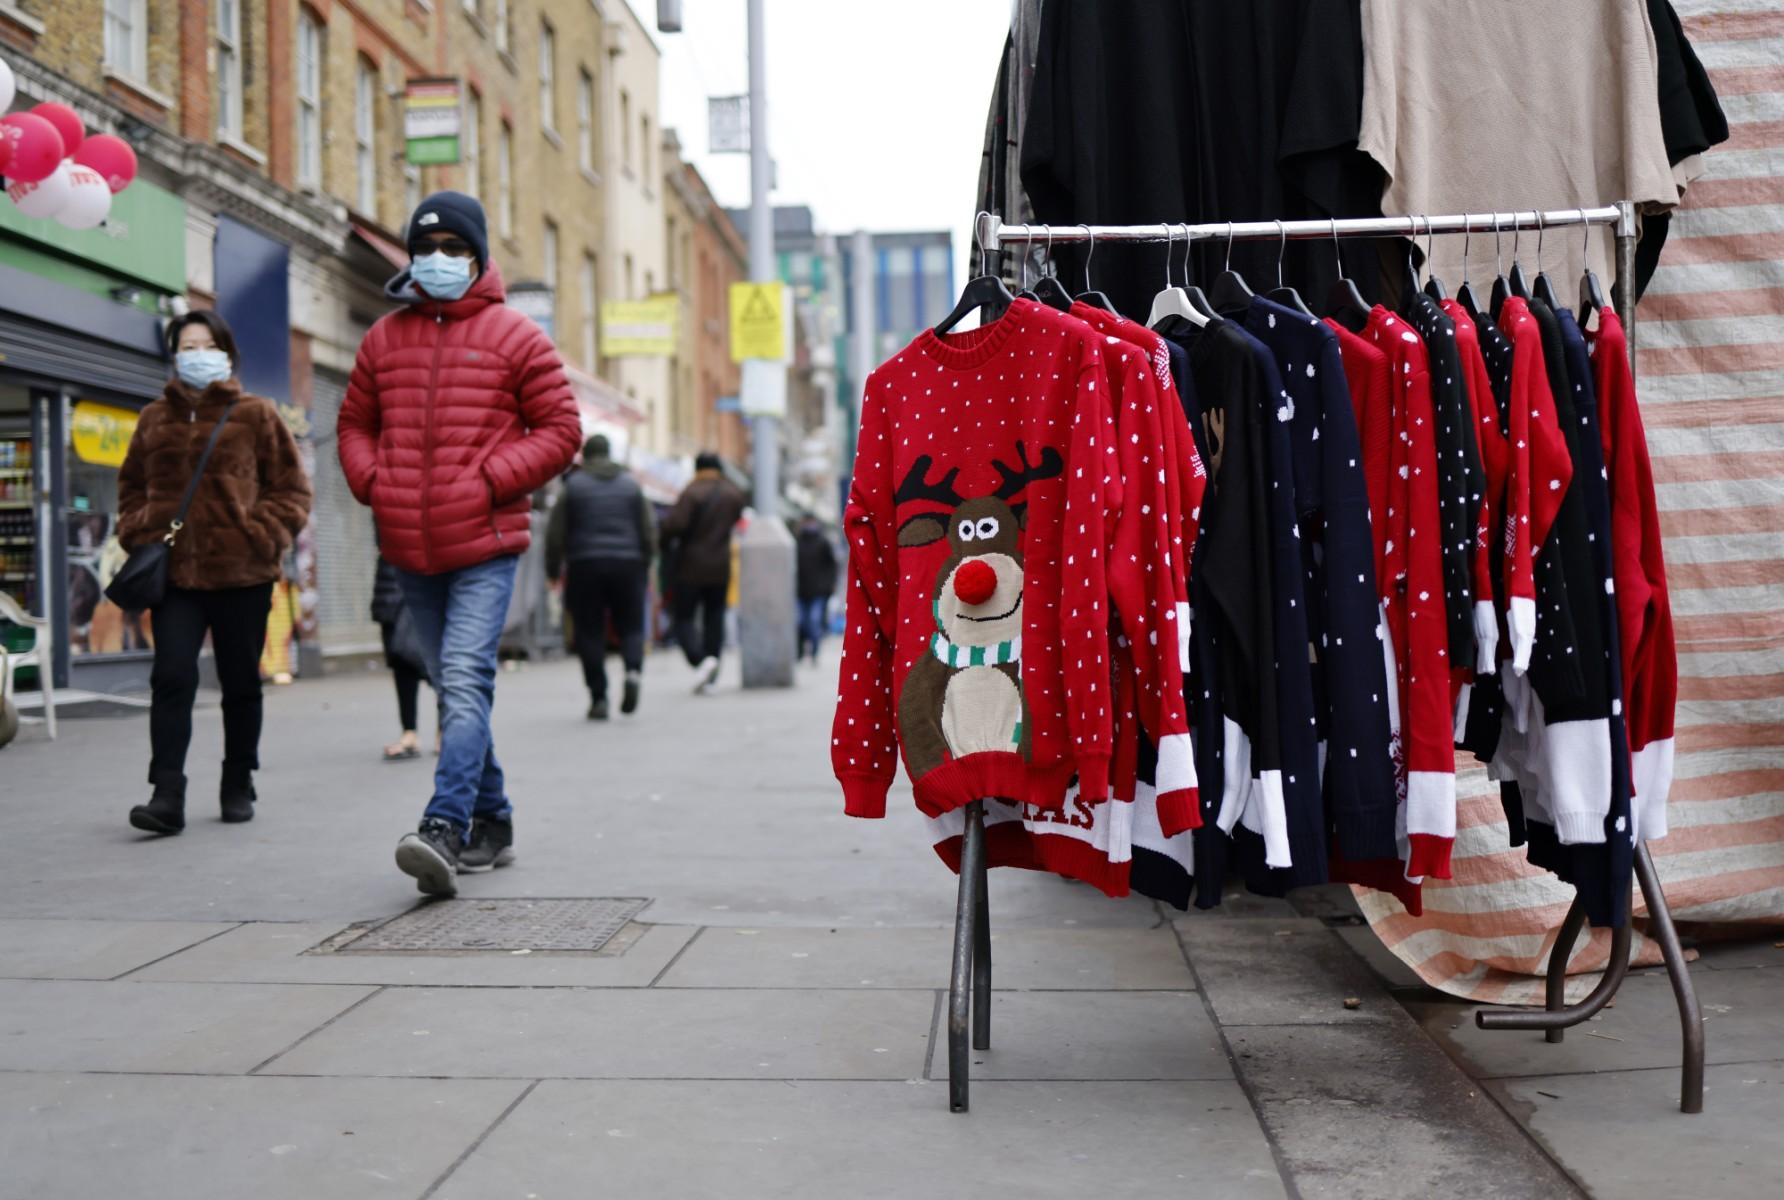 Pedestrians wearing face coverings to help mitigate the spread of Covid-19, walk past a Christmas jumpers displayed for sale on a market stall in east London on Dec 20. Photo: AFP